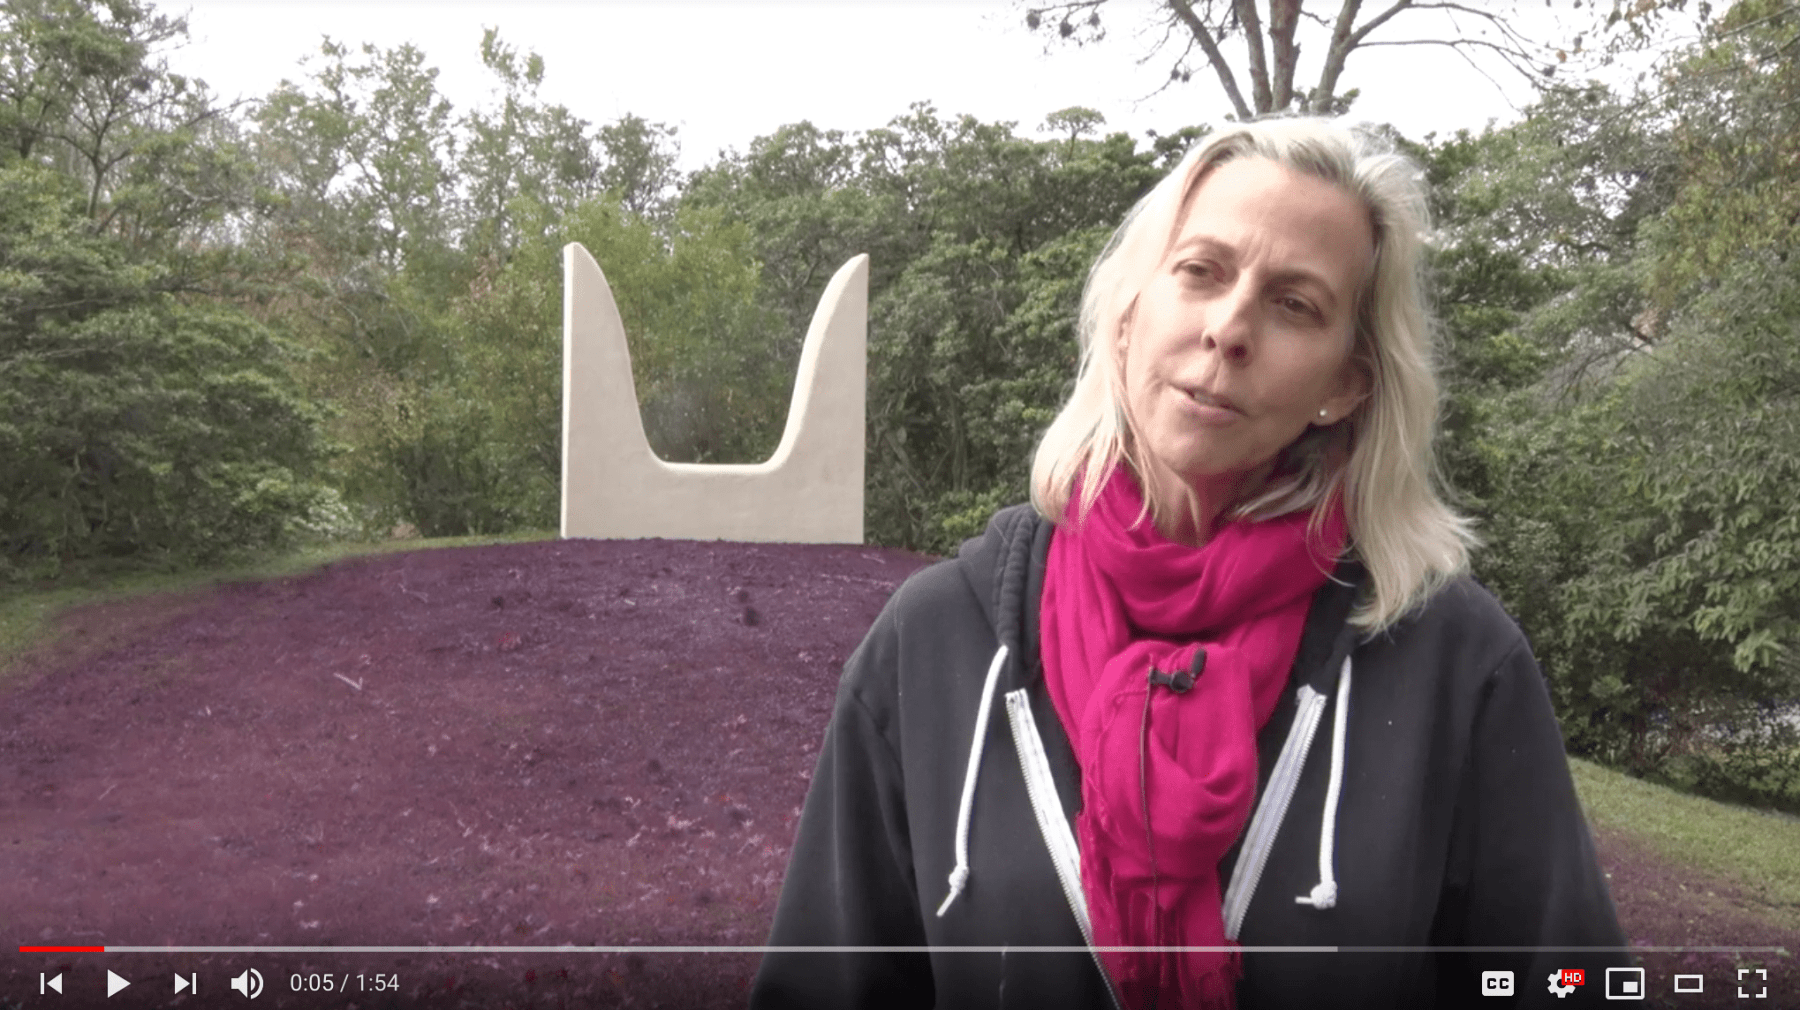 &nbsp;, New Orleans native Anastasia Pelias presents a monumental&nbsp;sculpture immersed in a painted landscape, an installation&nbsp;commissioned by the McNay for the Museum campus.&nbsp;Pelias&rsquo;s artworks span painting, drawing, video, sculpture, and&nbsp;installation, and are united through a cultural identity that&nbsp;combines her birthplace, Louisiana, and her ancestral roots&nbsp;in Greece. Installed by the artist,&nbsp;mama&nbsp;is at once a temporal&nbsp;artwork, an homage to Pelias&rsquo;s family history, and a site for quiet&nbsp;contemplation.